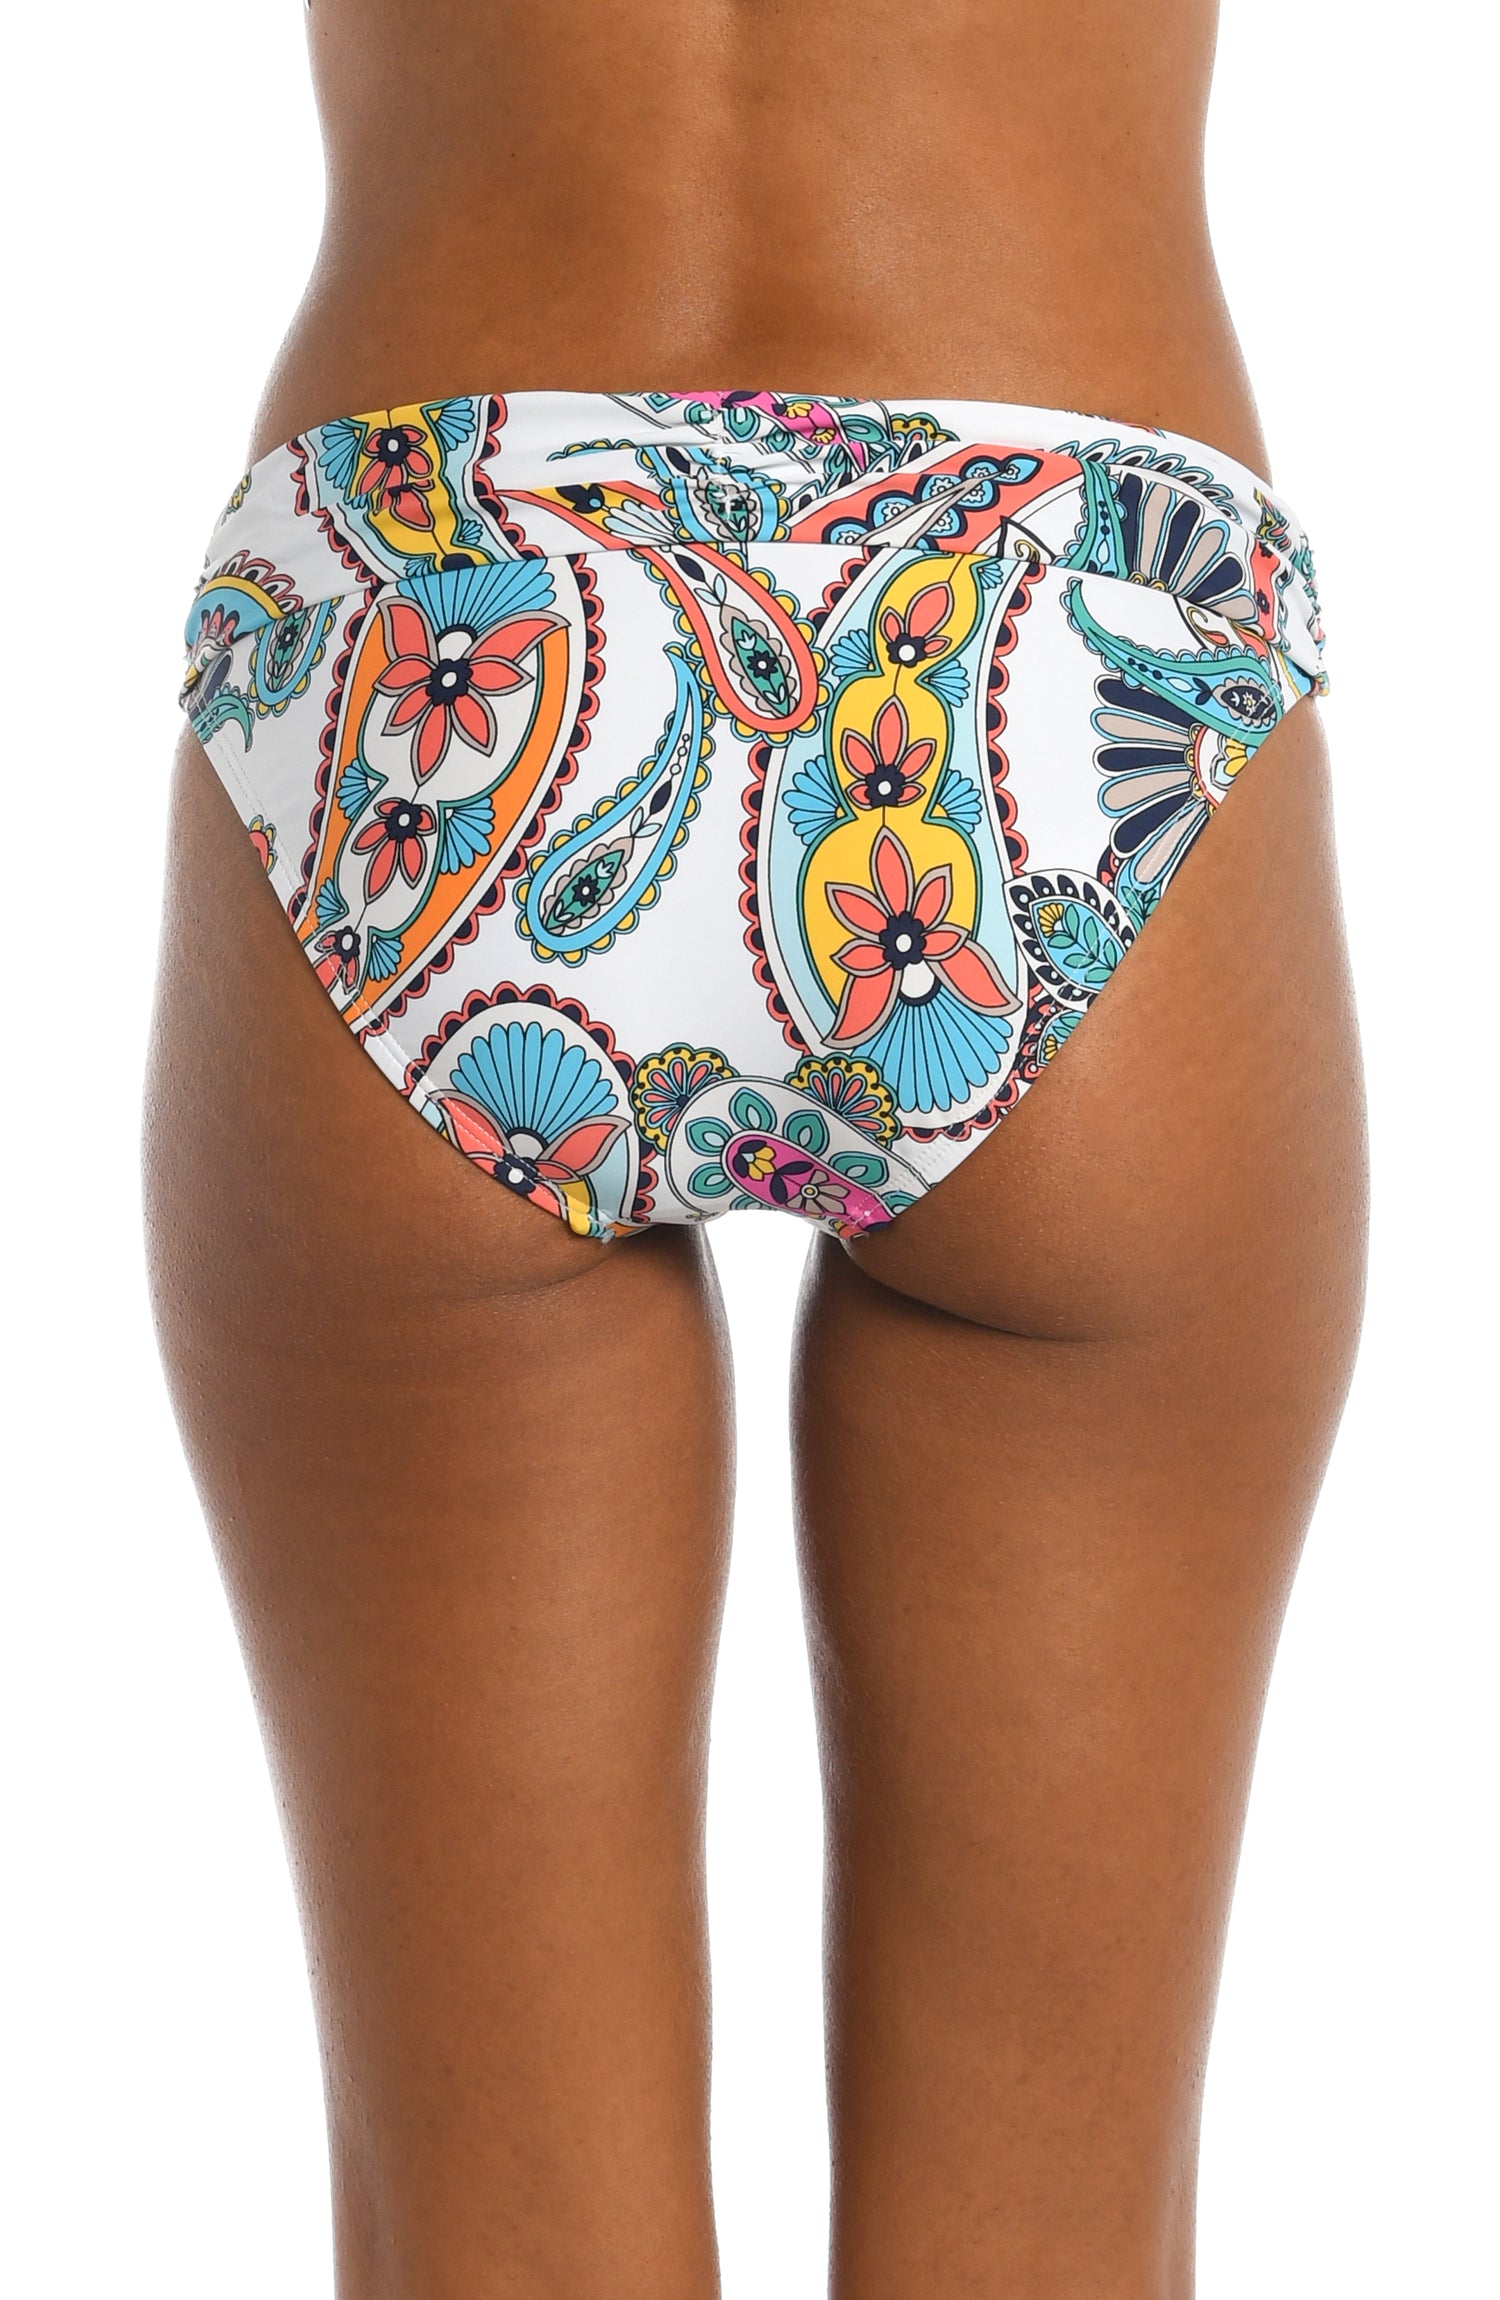 Model is wearing a multi colored paisley printed shirred hipster bottom from our Pave the Way collection!